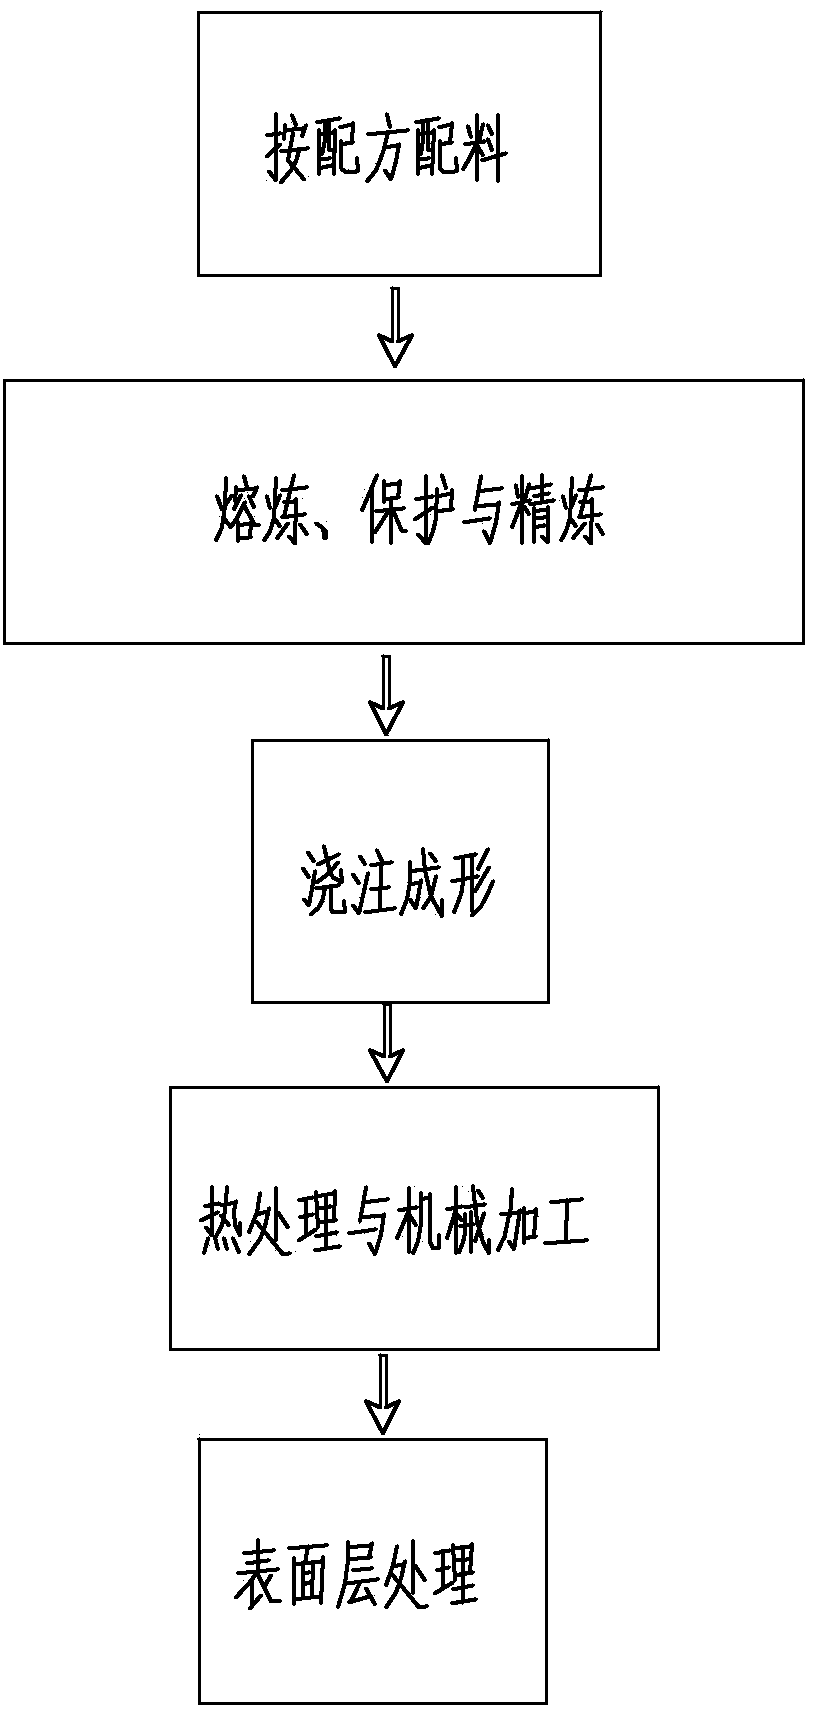 Easily-soluble magnesium alloy material as well as production method and application thereof